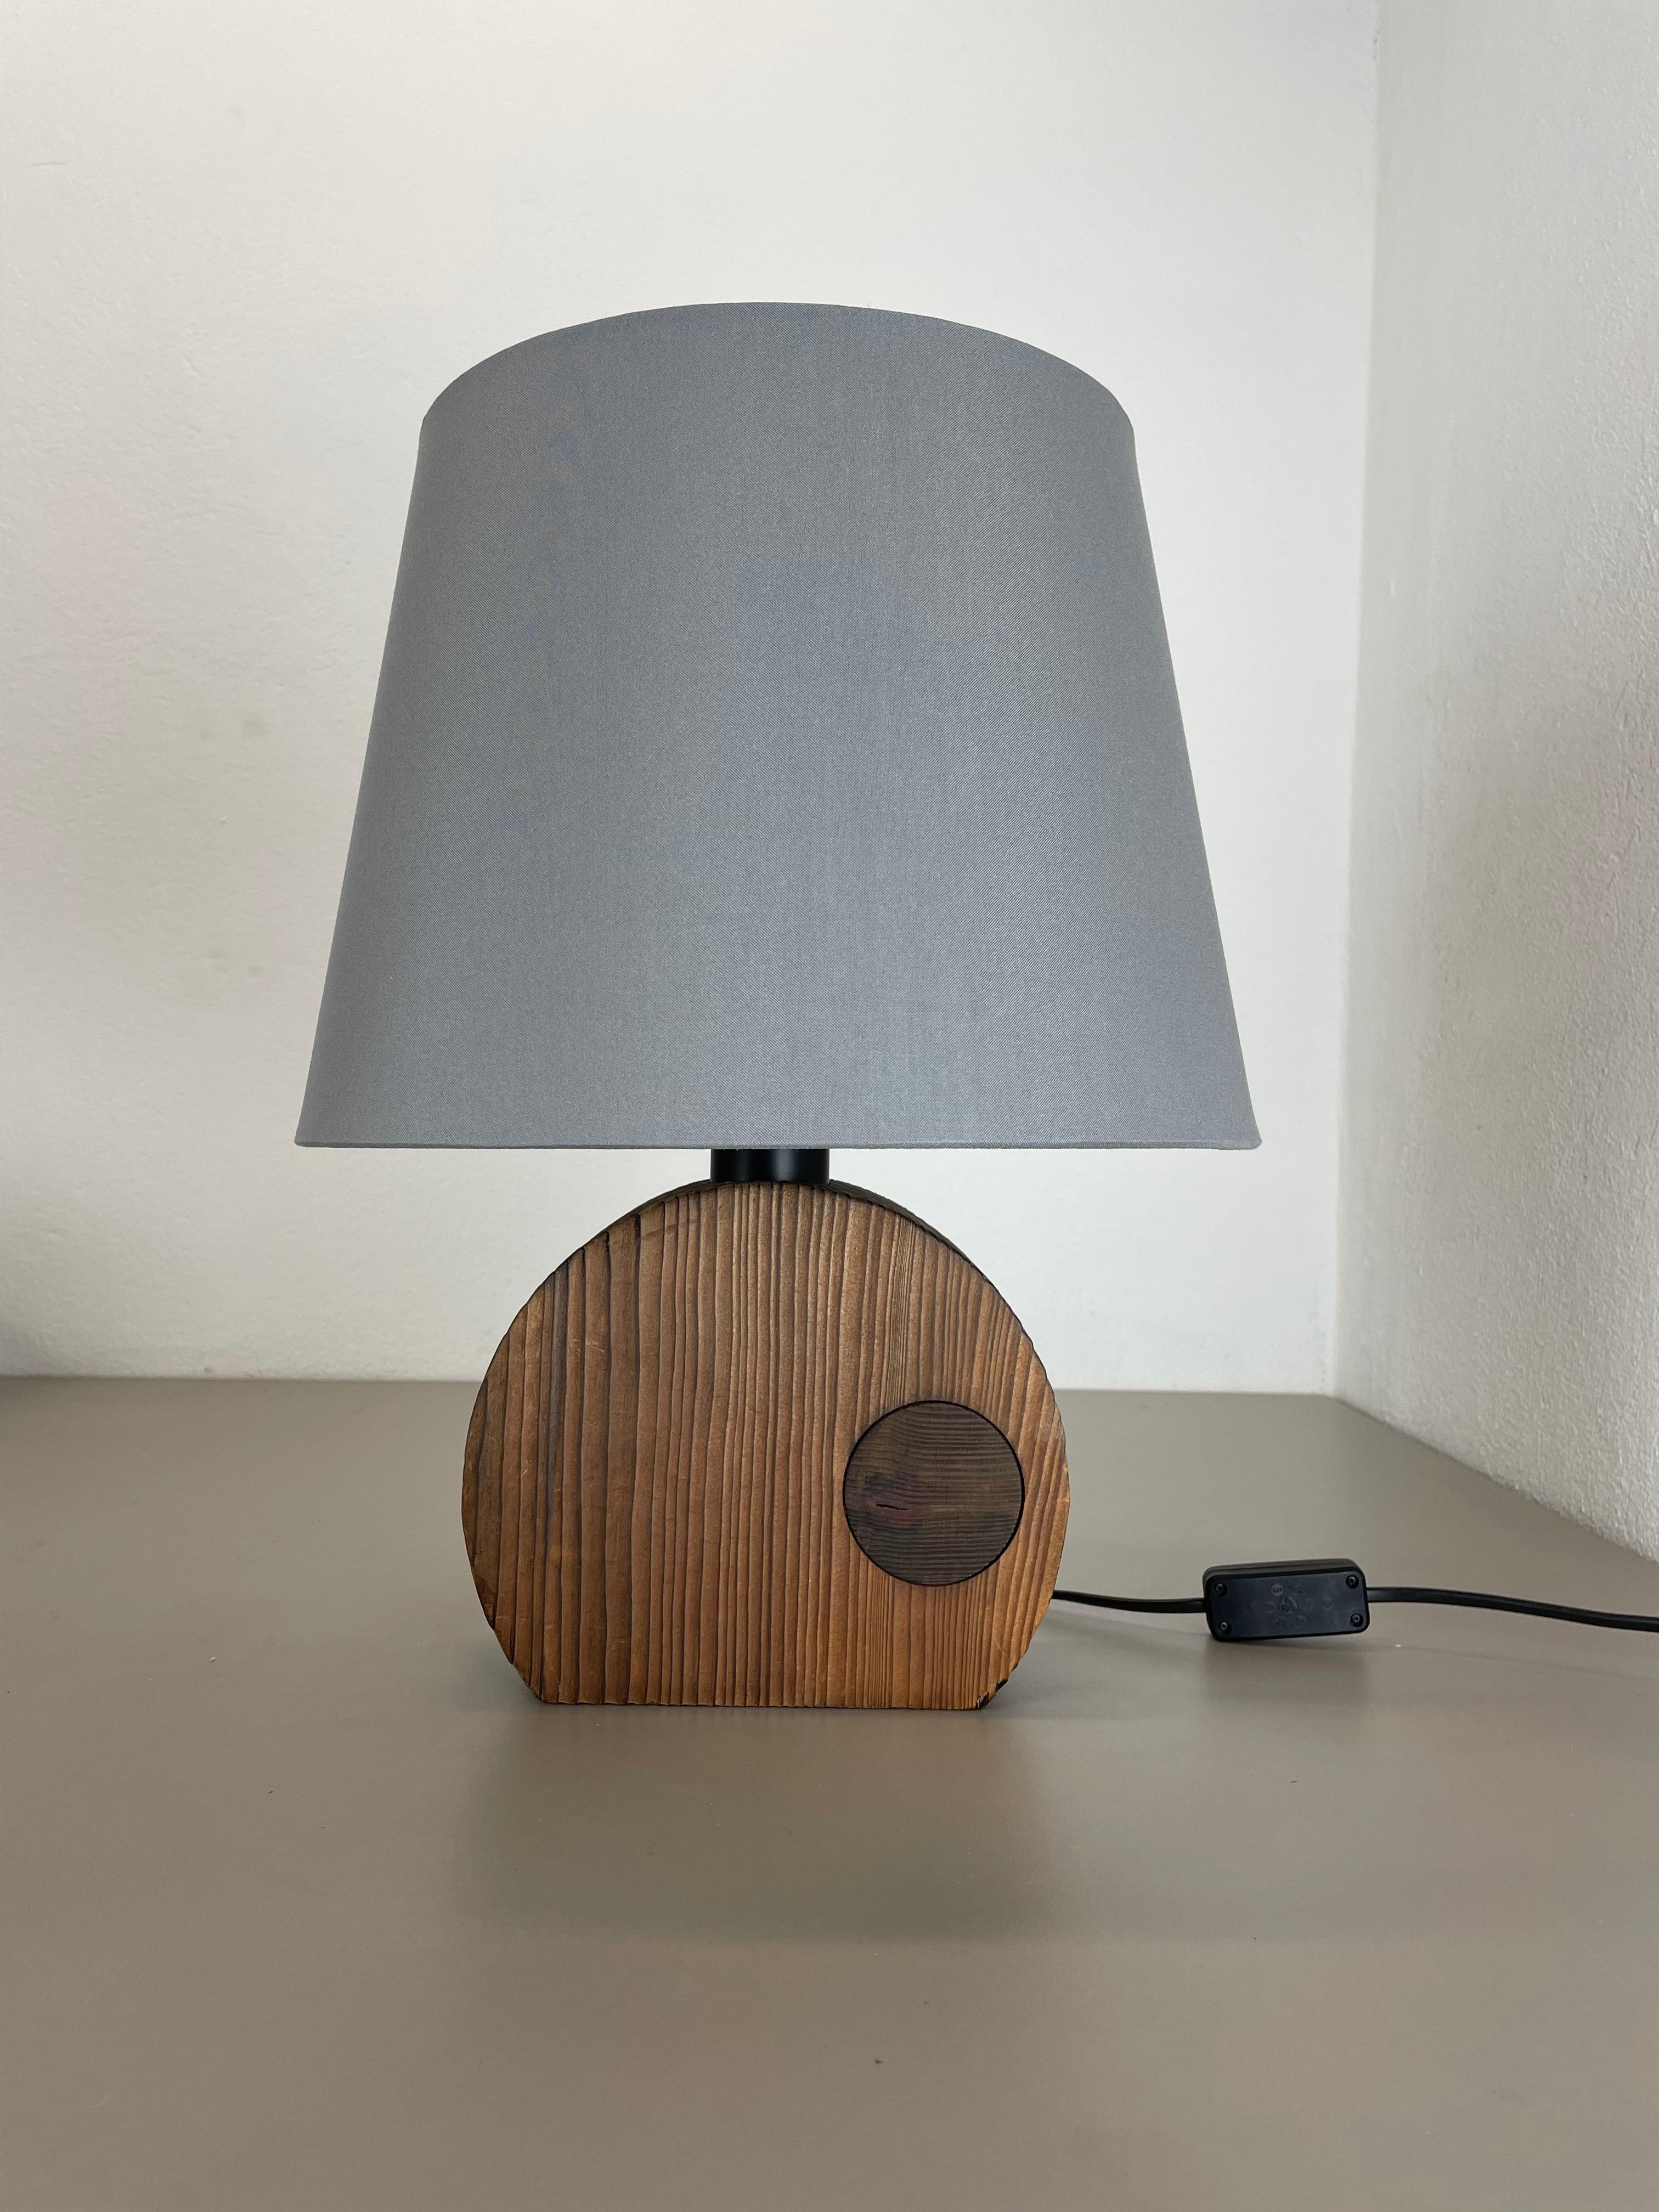 Article:

wooden organic table light


Producer:

TEMDE Lights, Germany



Origin:

Germany



Age:

1970s



Original vintage 1970s wooden table light base made in Germany. High quality German production with a nice abstract